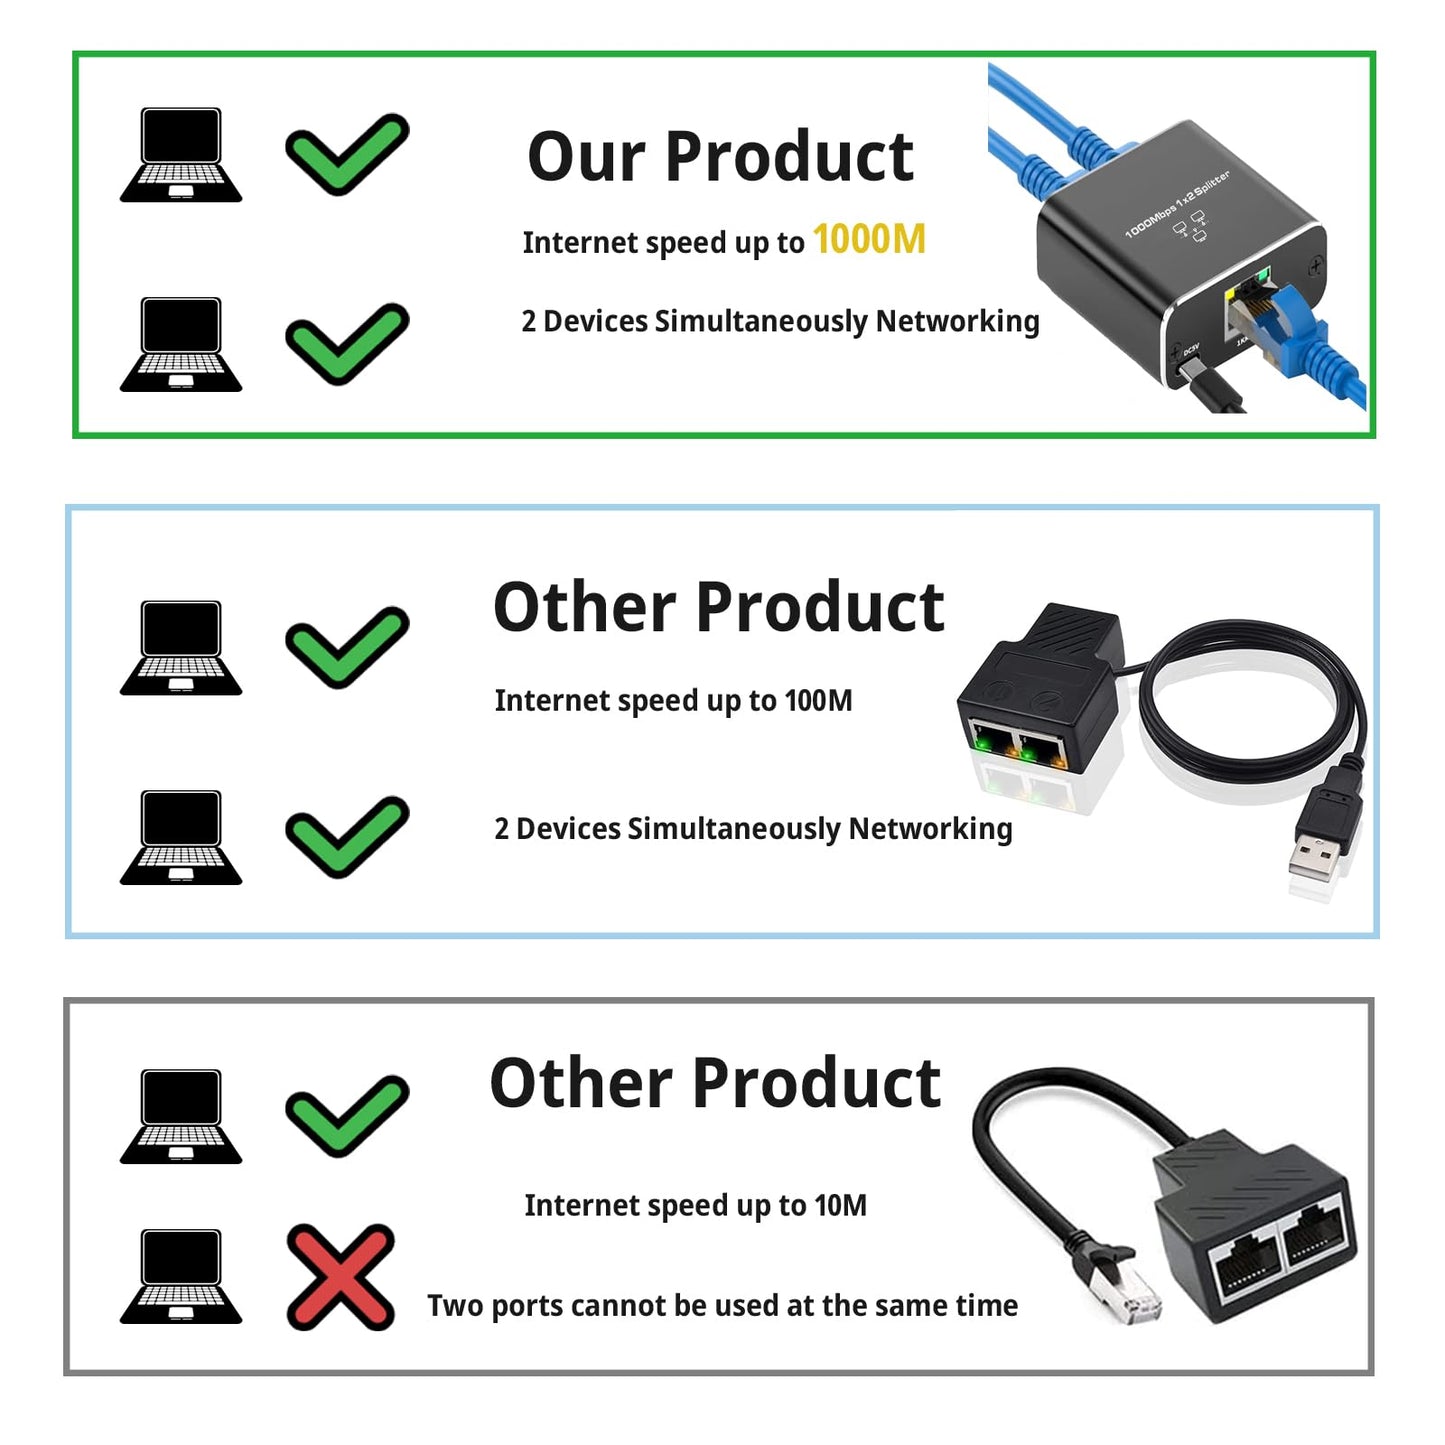 Pushua Ethernet Splitter 1 to 2 High Speed 1000Mbps, Gigabit Ethernet Splitter, LAN Splitter with USB Power Cable, RJ45 Splitter for Cat5/5e/6/7/8 Cable[2 Devices Simultaneously Networking]